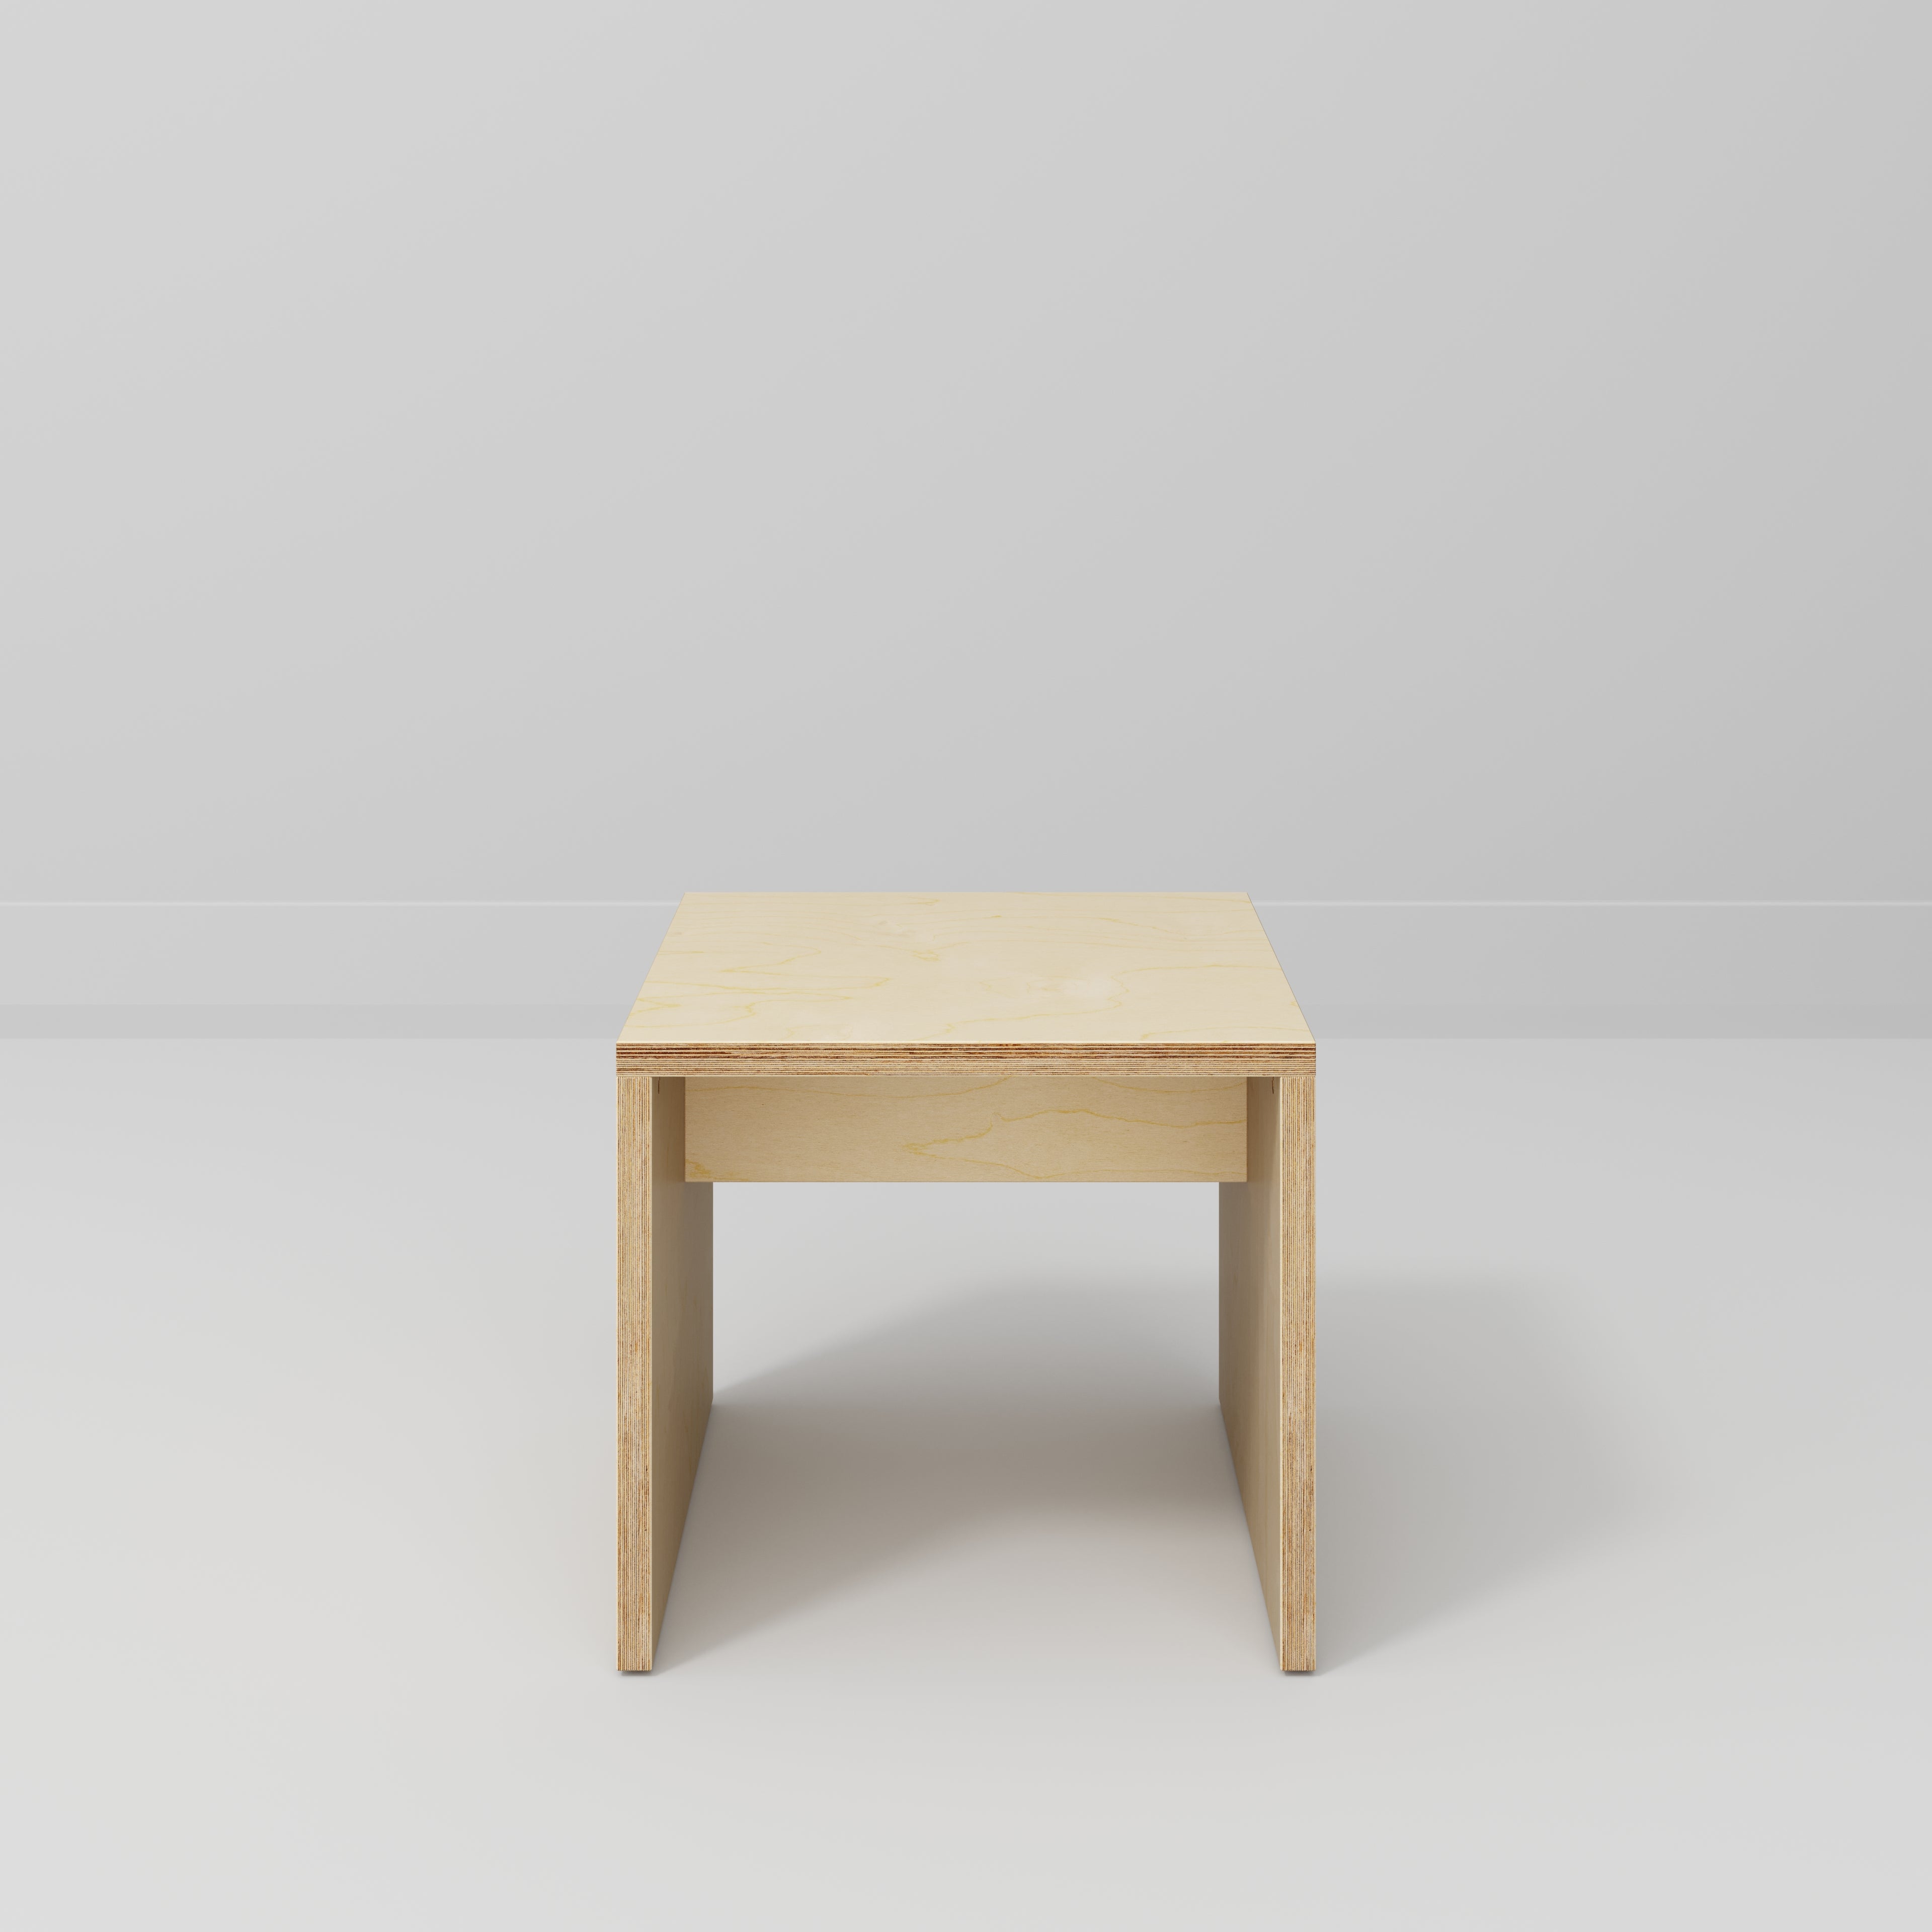 Side Table with Solid Sides - Plywood Birch - 500(w) x 500(d) x 450(h)